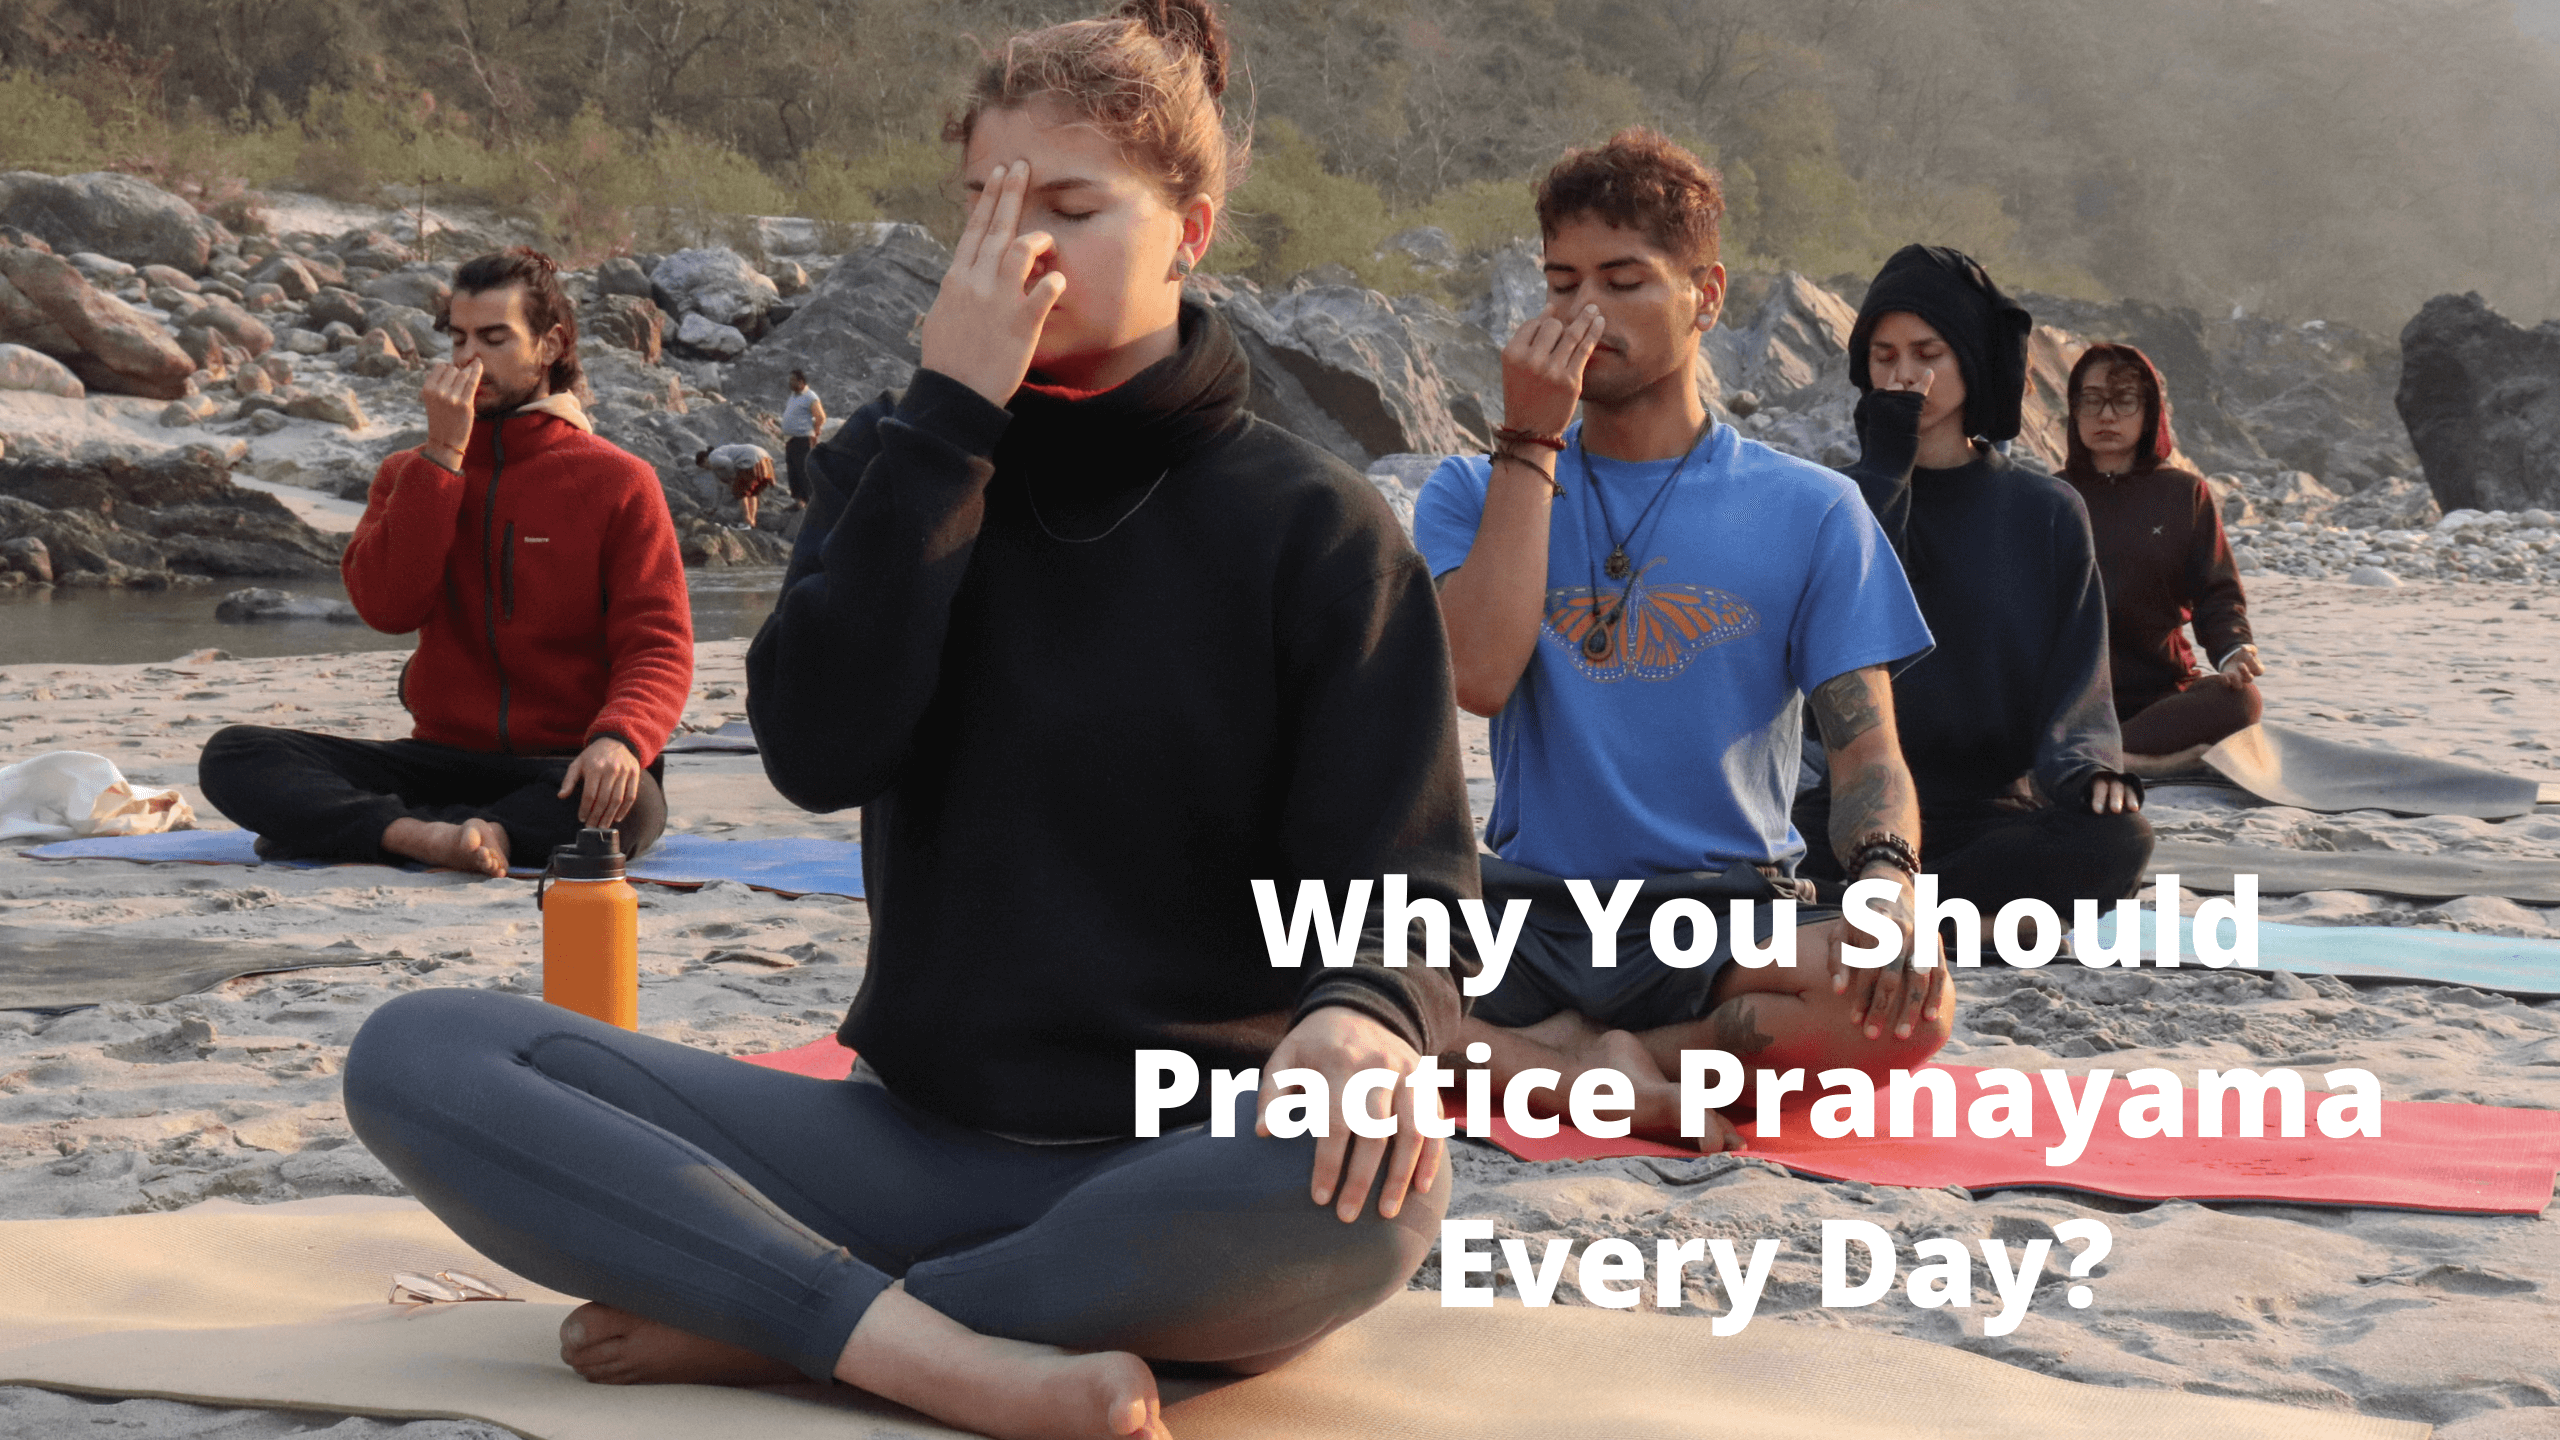 Why You Should Practice Pranayama Every Day?